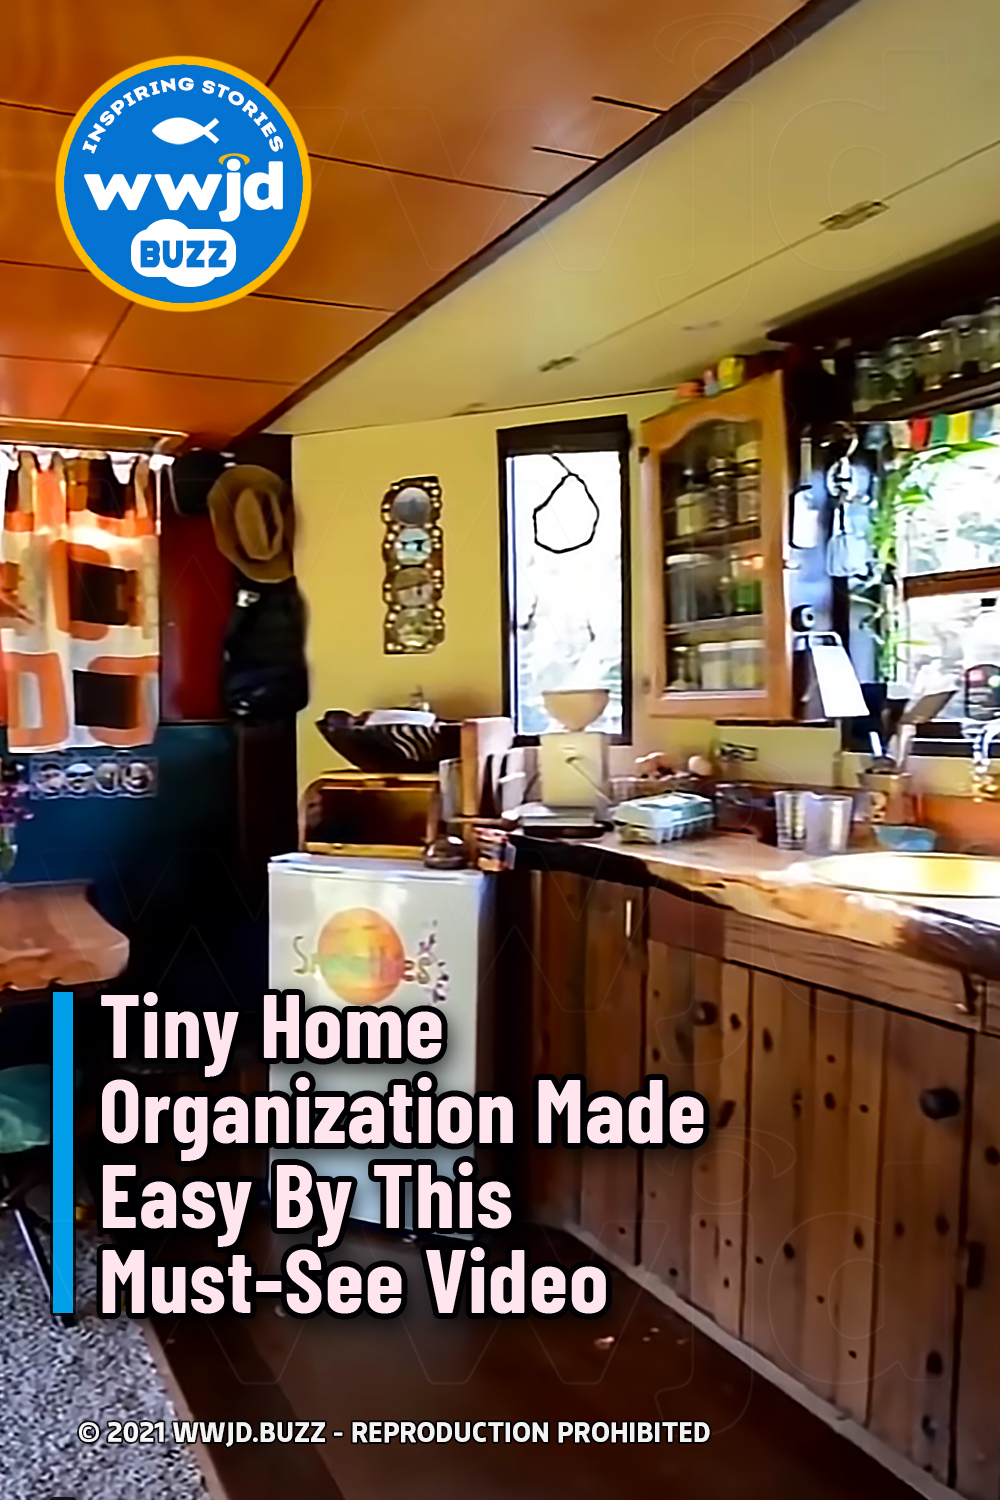 Tiny Home Organization Made Easy By This Must-See Video